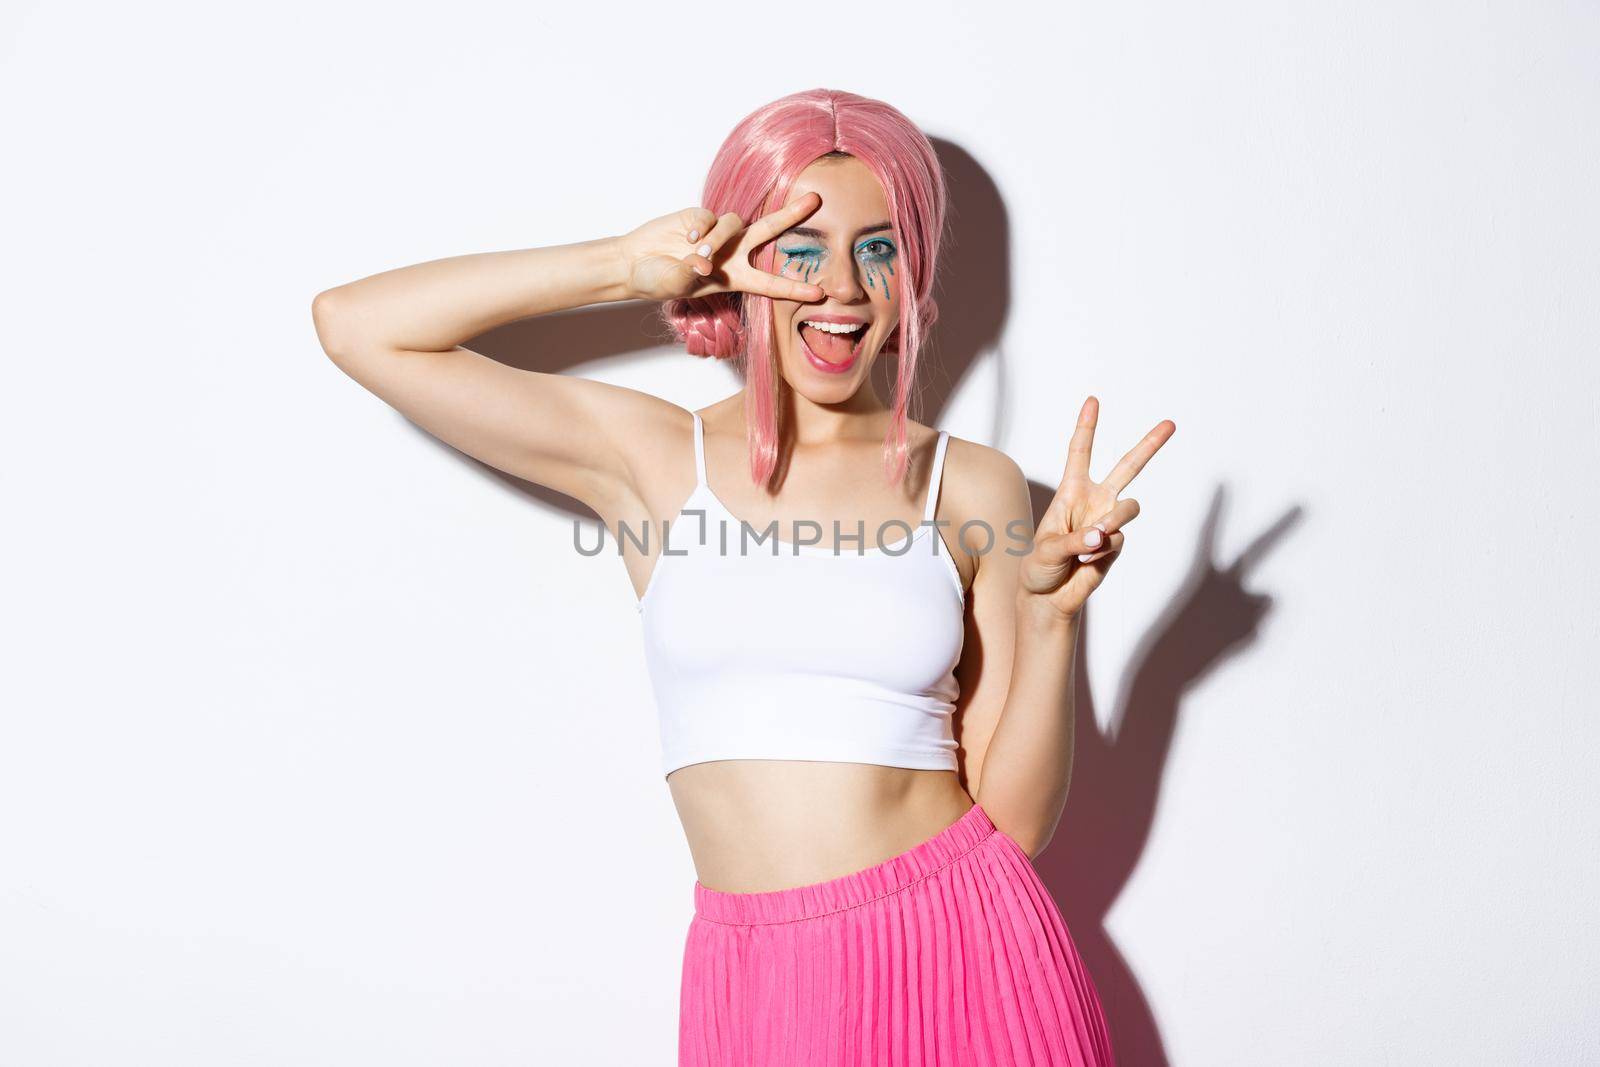 Happy beautiful girl in pink wig, dressed-up for halloween party, showing peace signs, smiling and winking coquettish at camera.